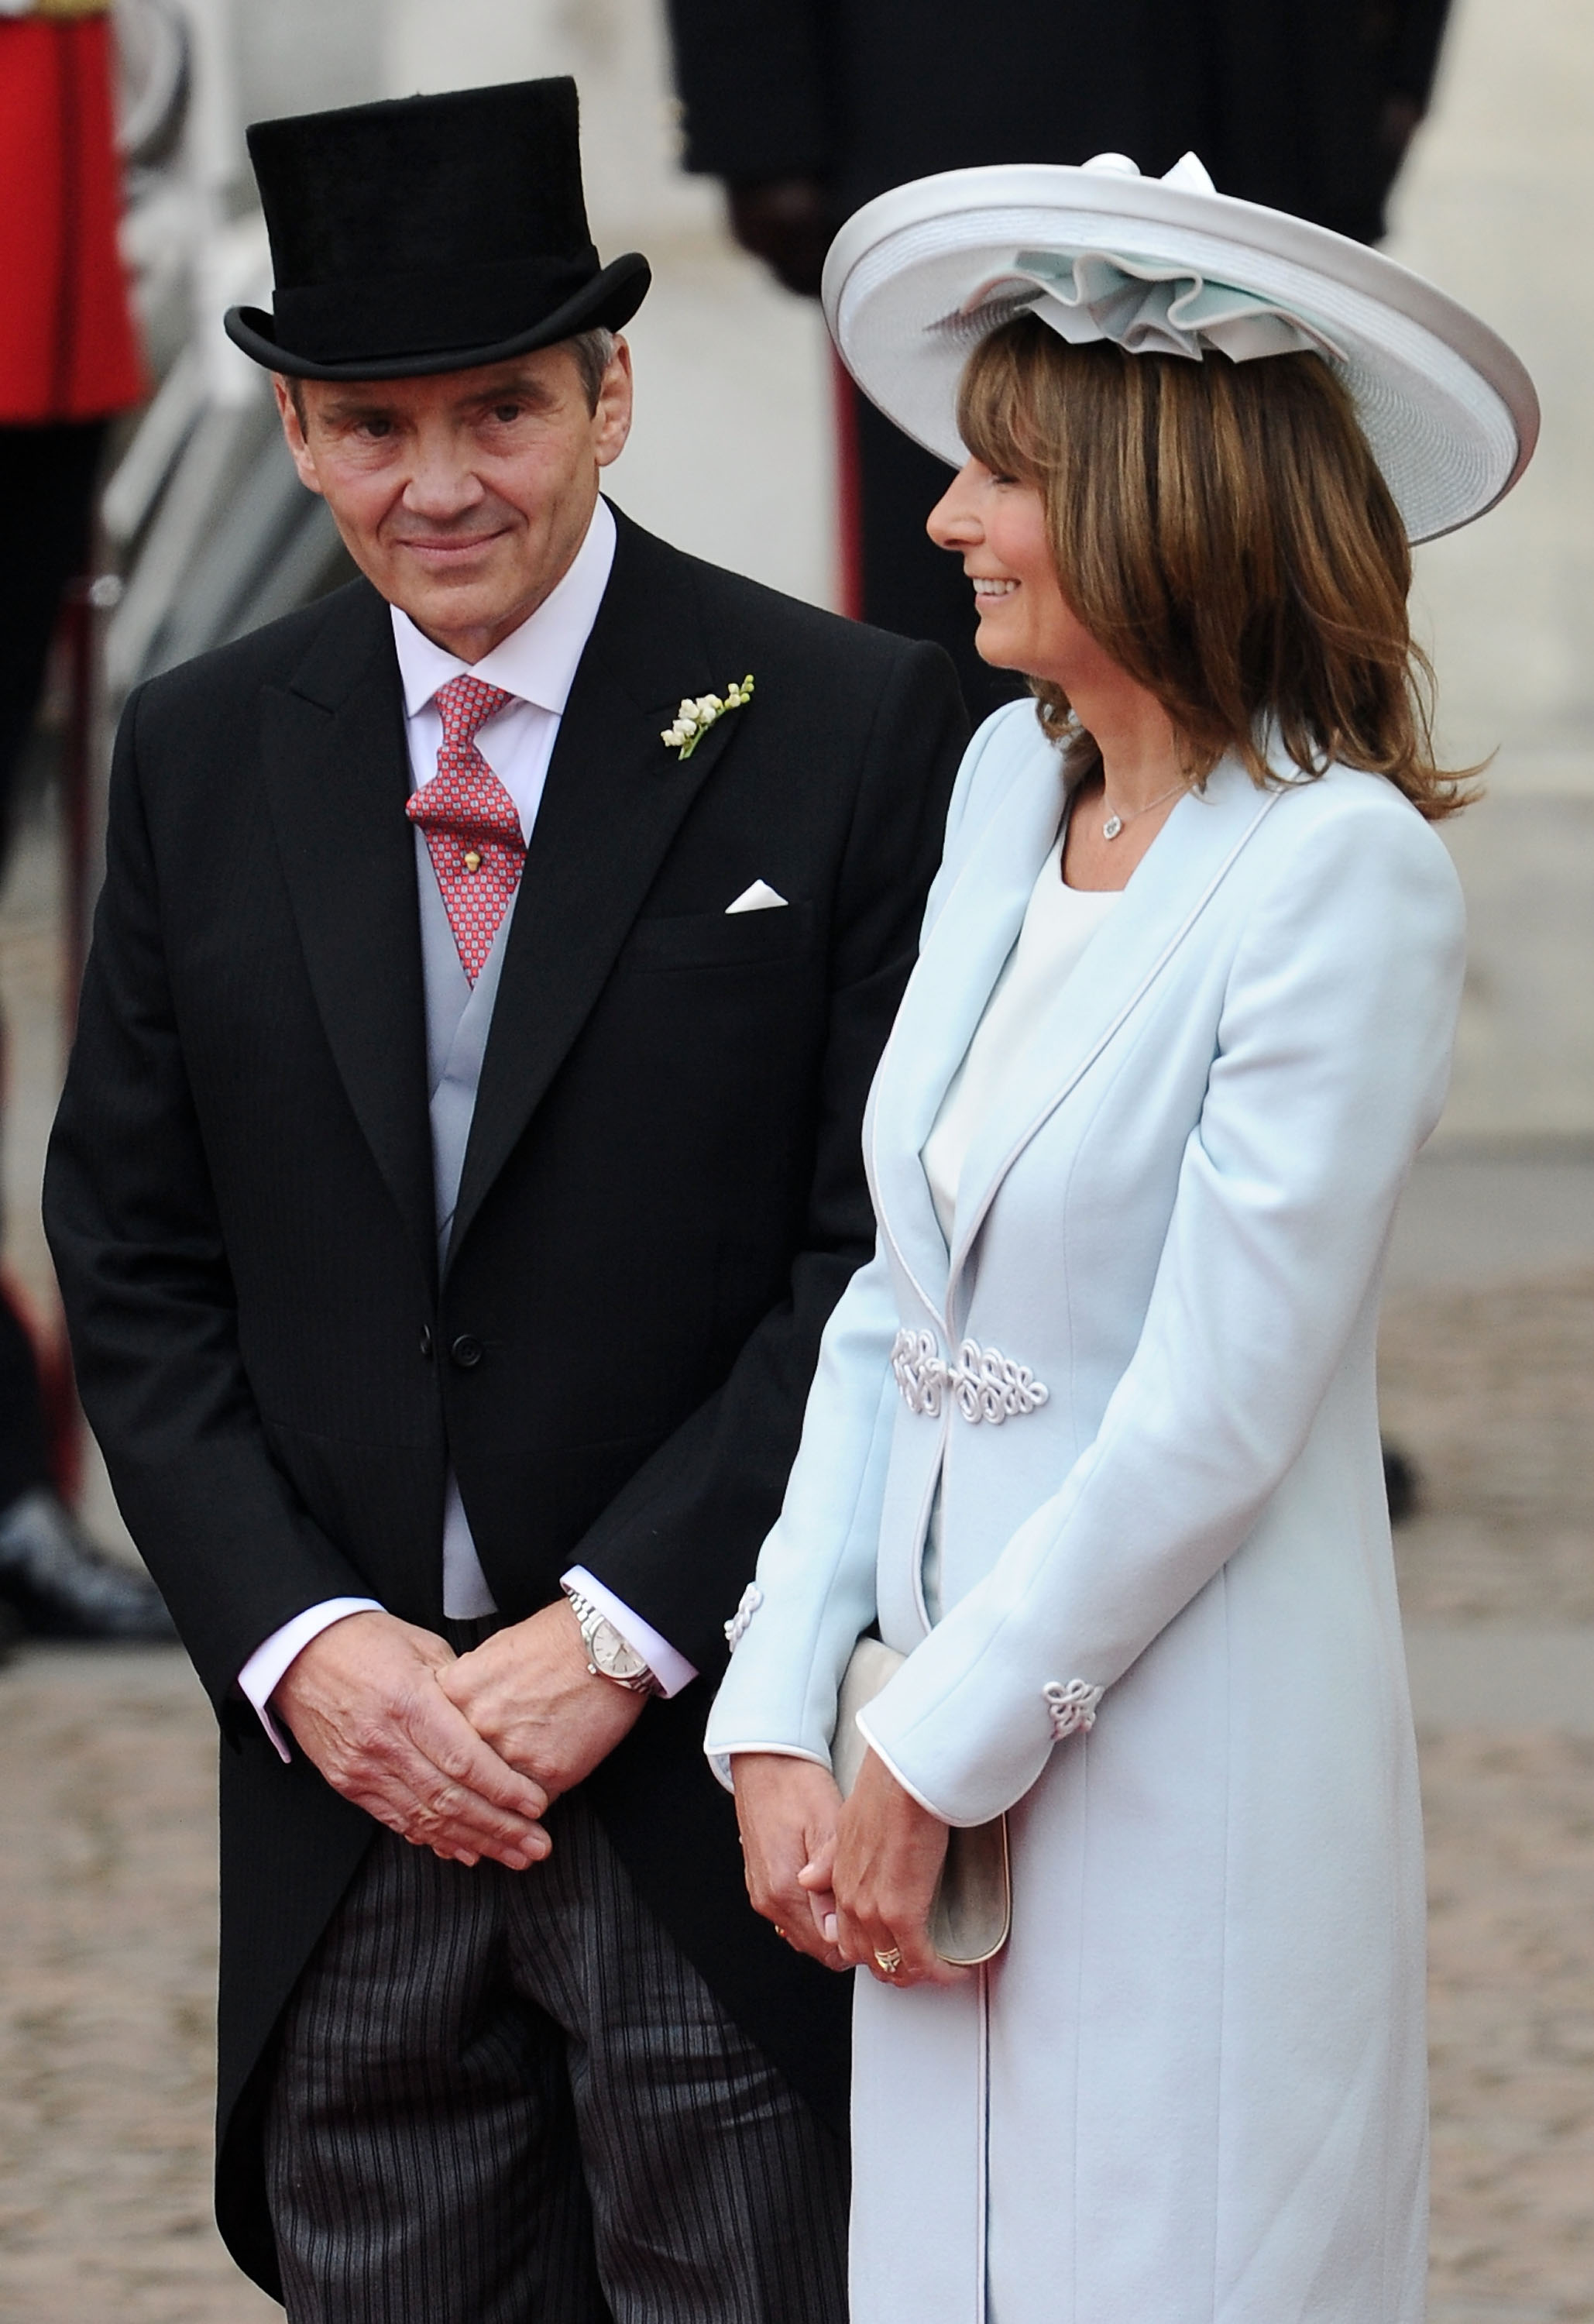 Michael Middleton and Carole Middleton exit Westminster Abbey after the Royal Wedding of Prince William to Catherine Middleton in London, England, on April 29, 2011. | Source: Getty Images